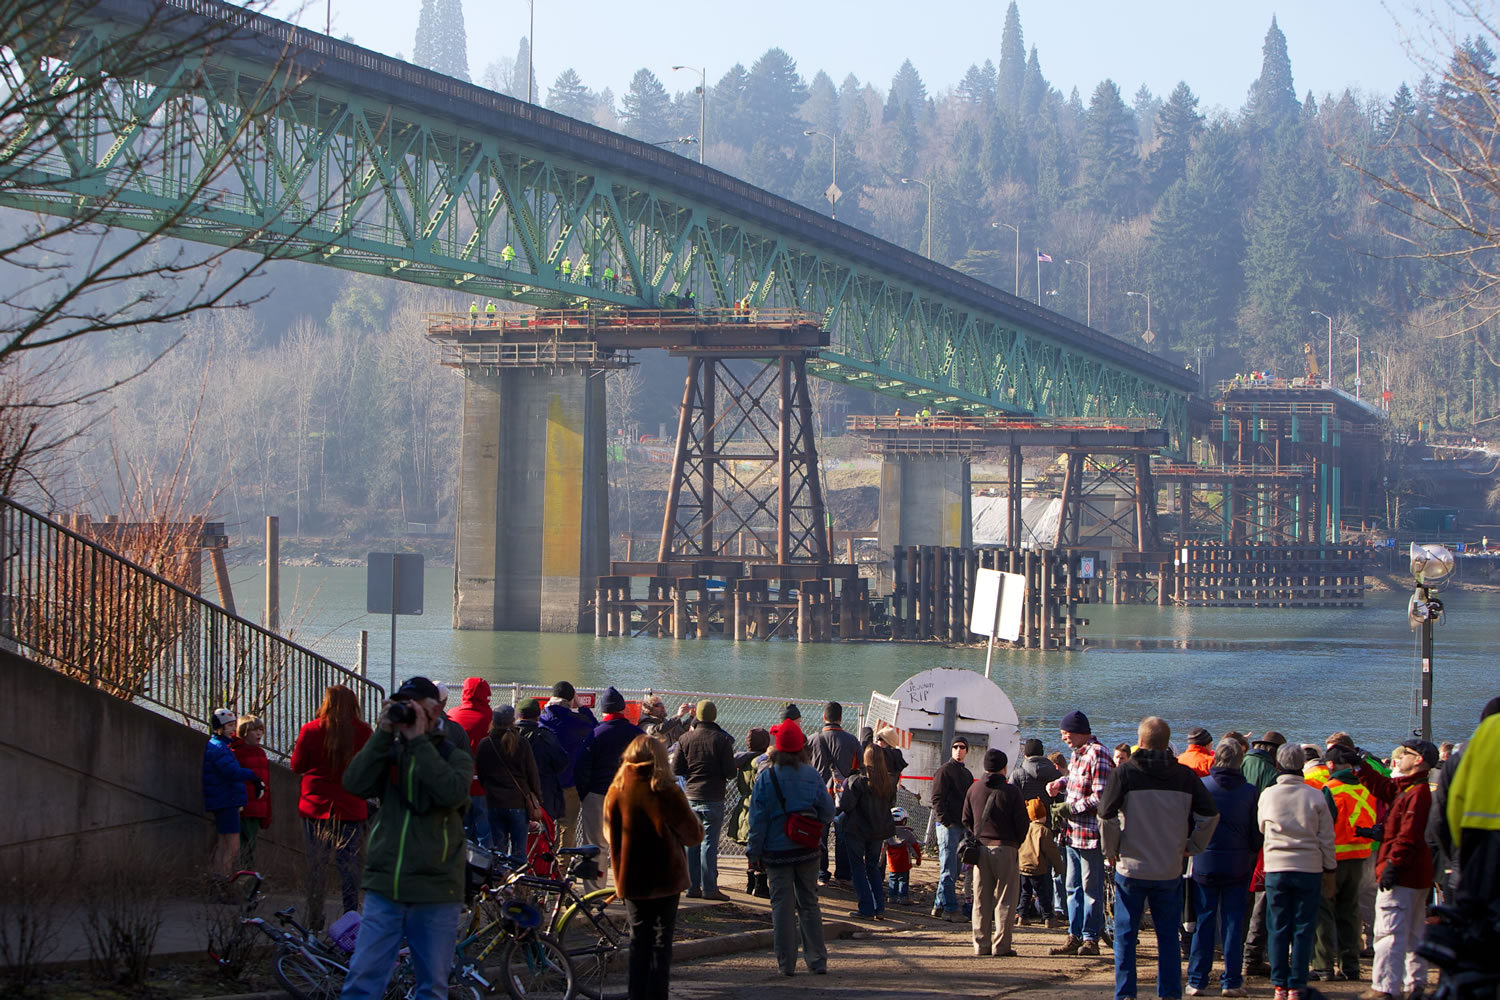 Spectators look on as the Sellwood Bridge is moved Jan 19, 2013, to temporary supports so a new bridge could be built across the Willamette River in Portland.